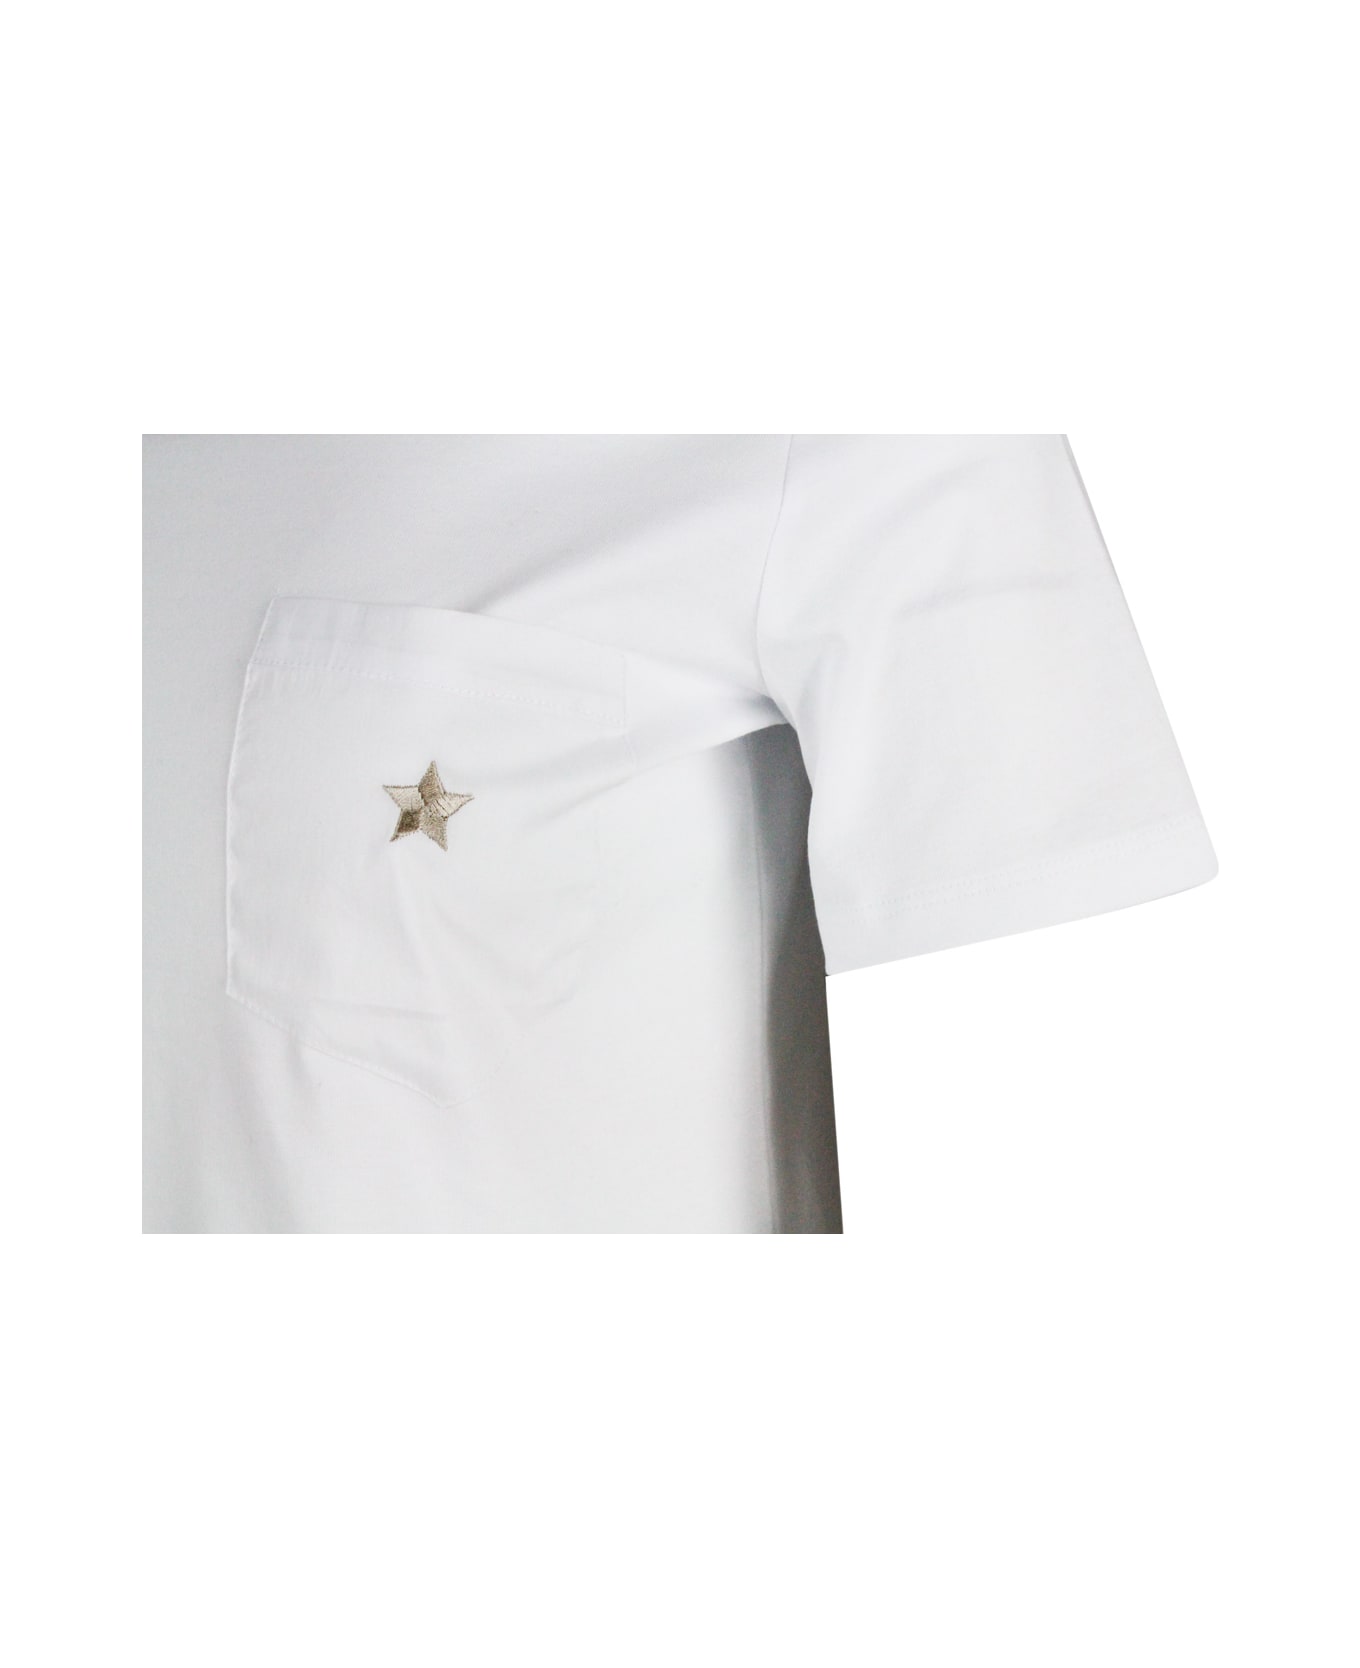 Lorena Antoniazzi Short-sleeved Round-neck Cotton Jersey T-shirt With Chest Pocket And Embroidered Star - White